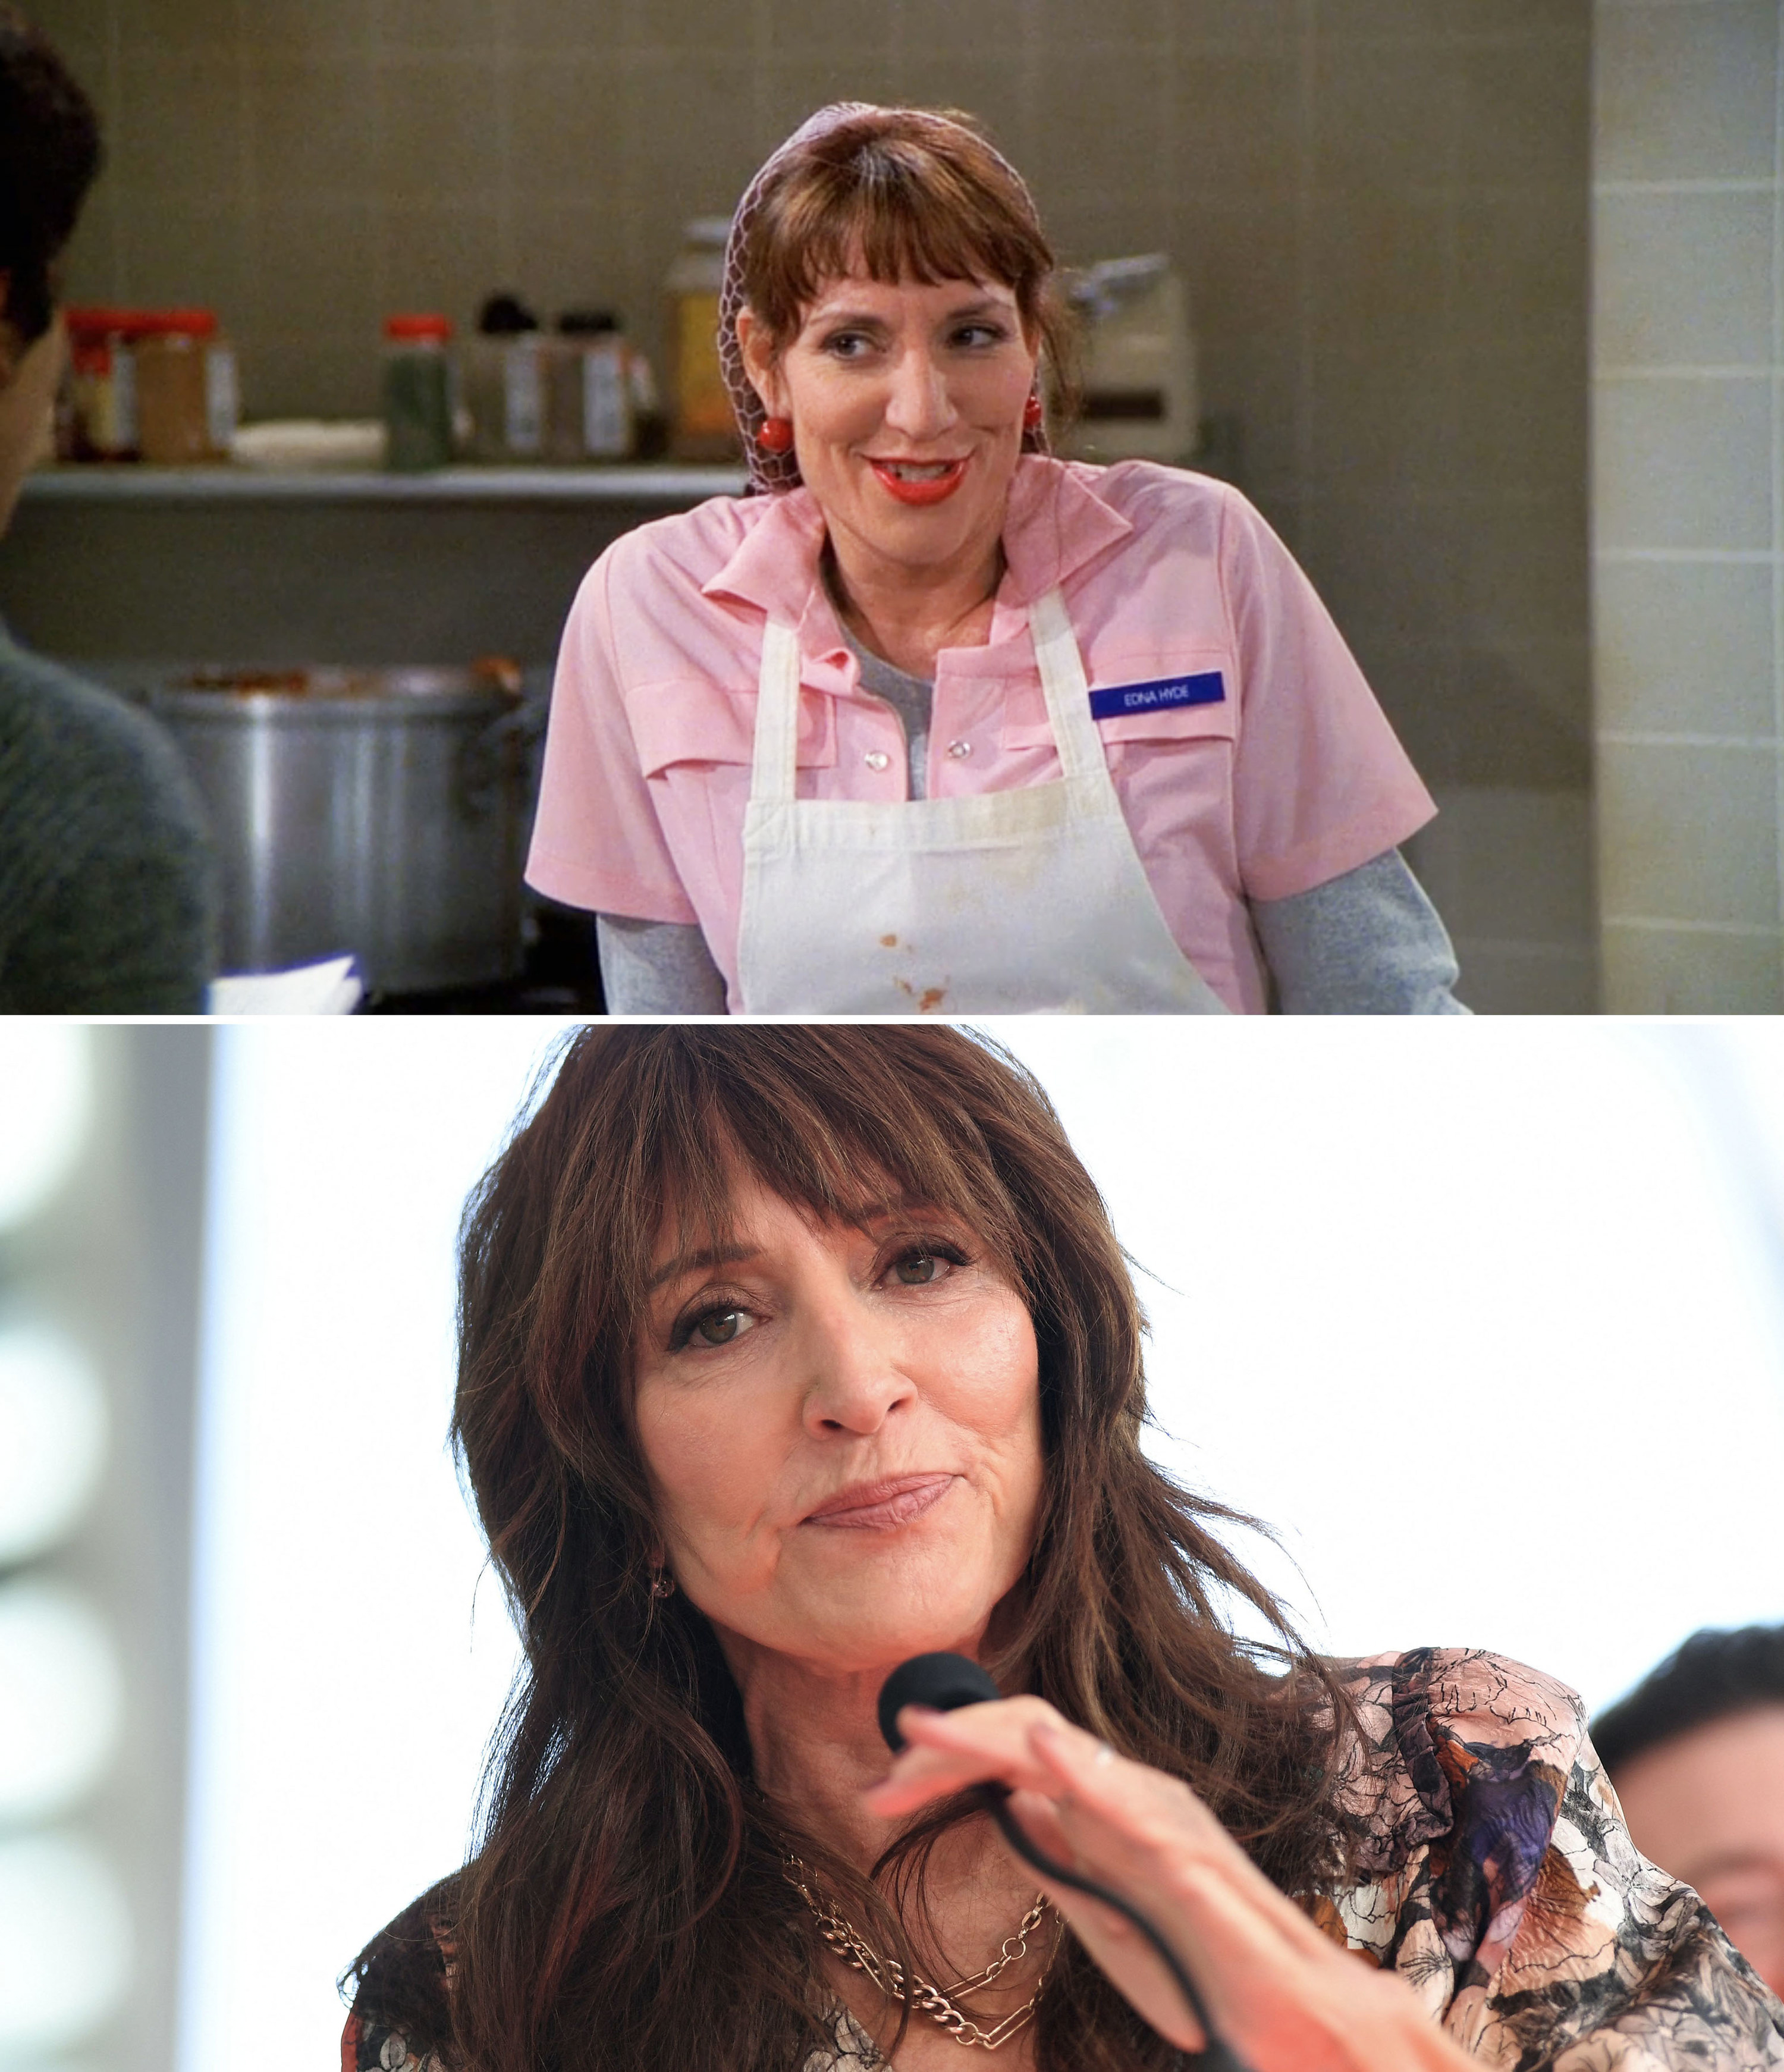 Katey as Edna wearing an apron and a close-up of Katey holding a microphone